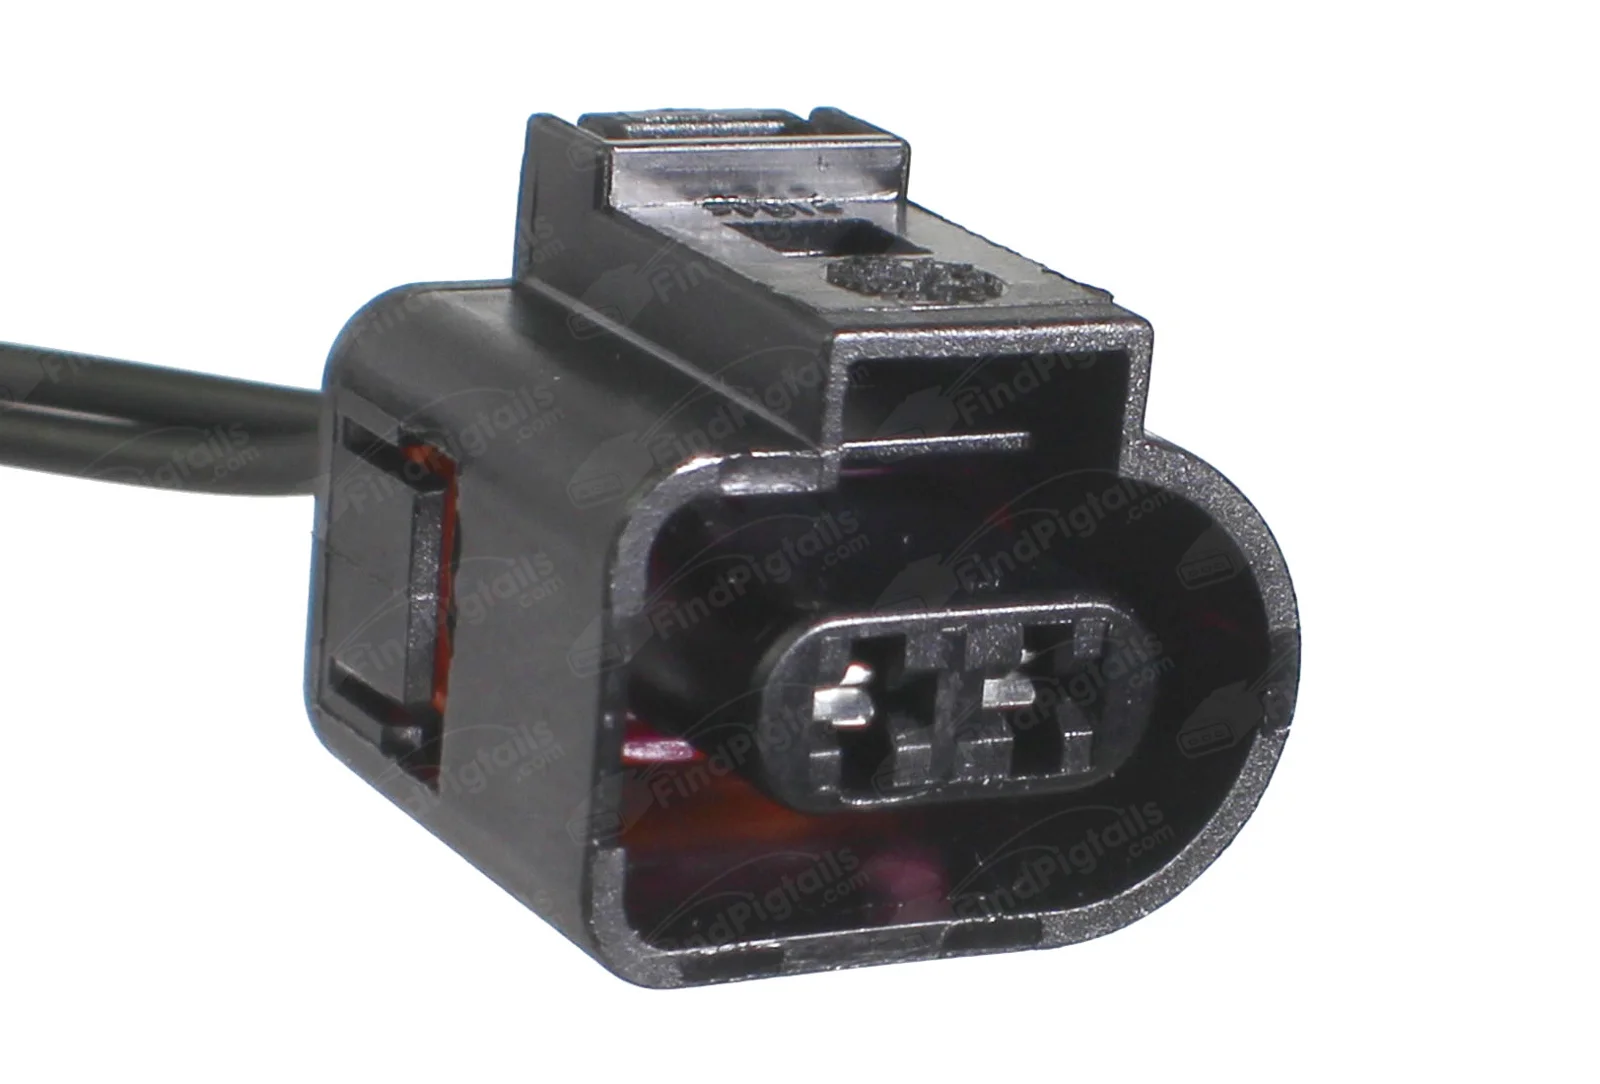 B65A2 is a 2-pin automotive connector which serves at least 1040 functions for 89+ vehicles.